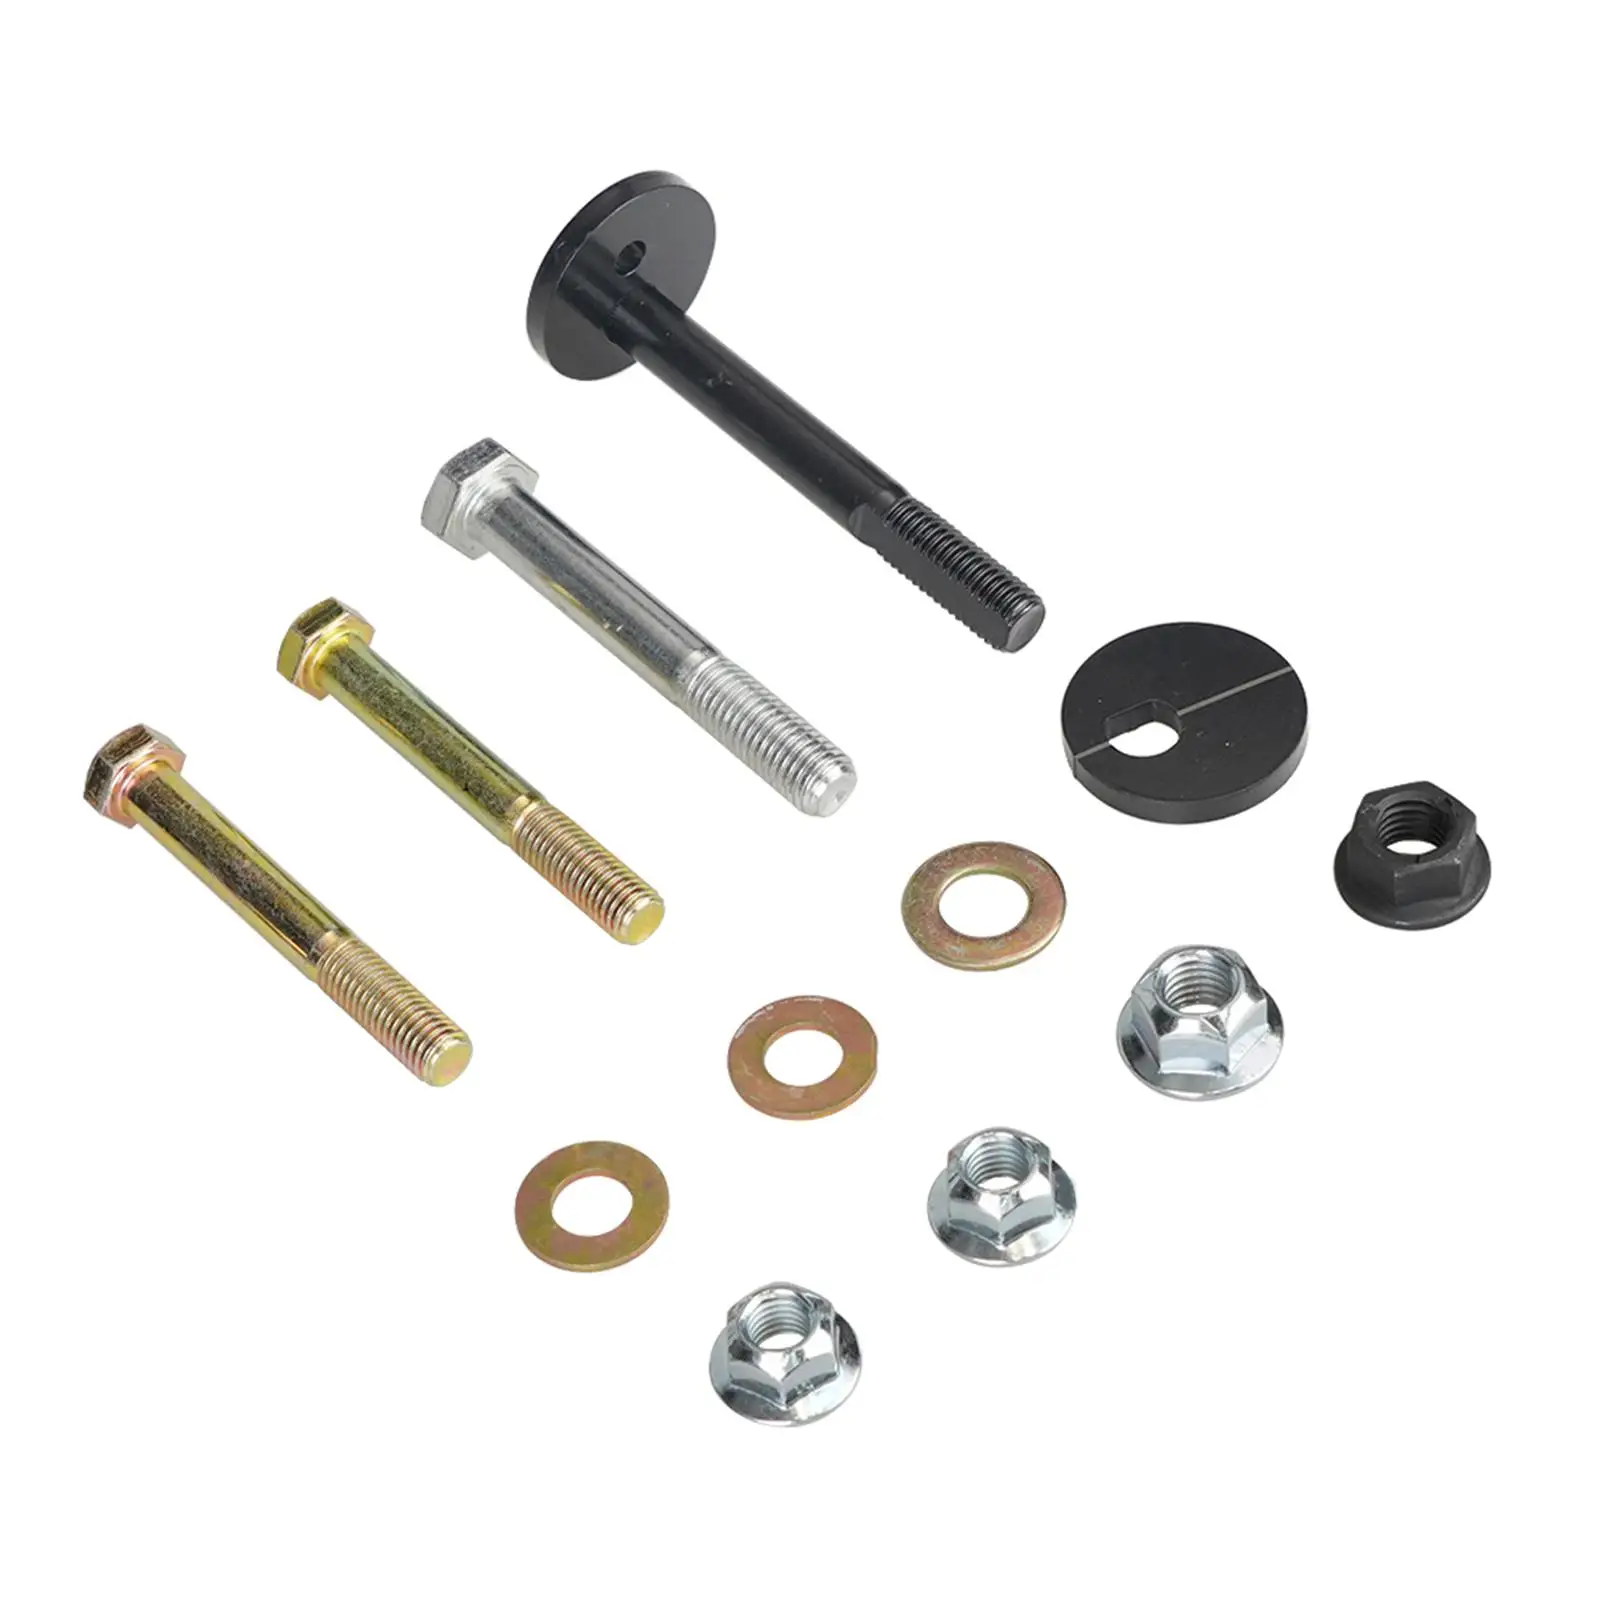 Front Control Arms cam Bolts Assembly for Dodge RAM 2500 3500 2000 to 2002 1500 2000 to 2001 Replaces Simple Installation